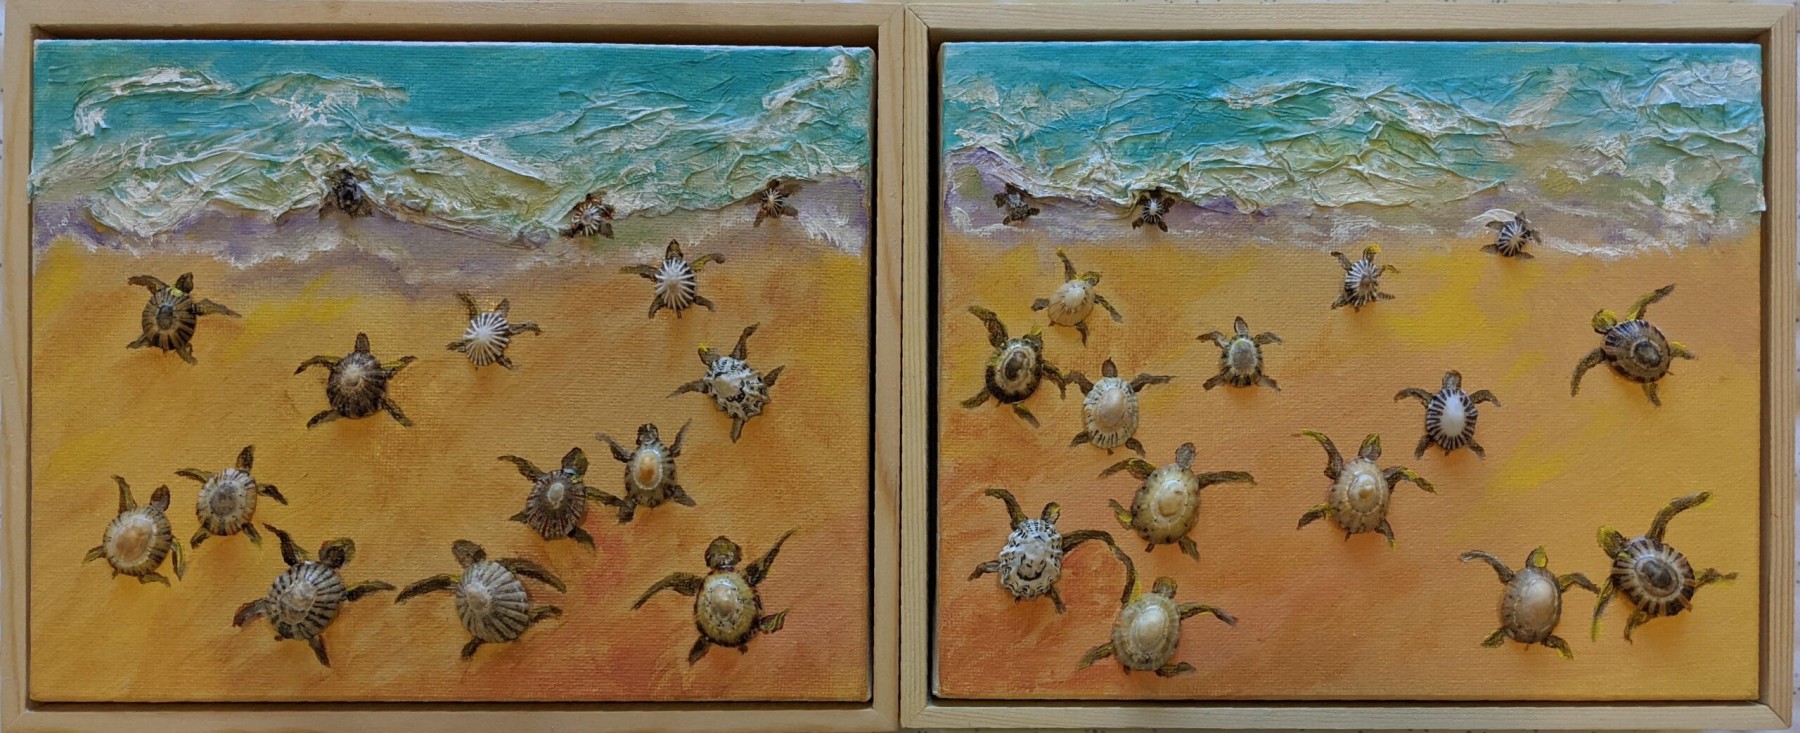 Sheryl Stuart - Hatchlings - Collage (oil, tissue paper and shells) - 55 x 22cm